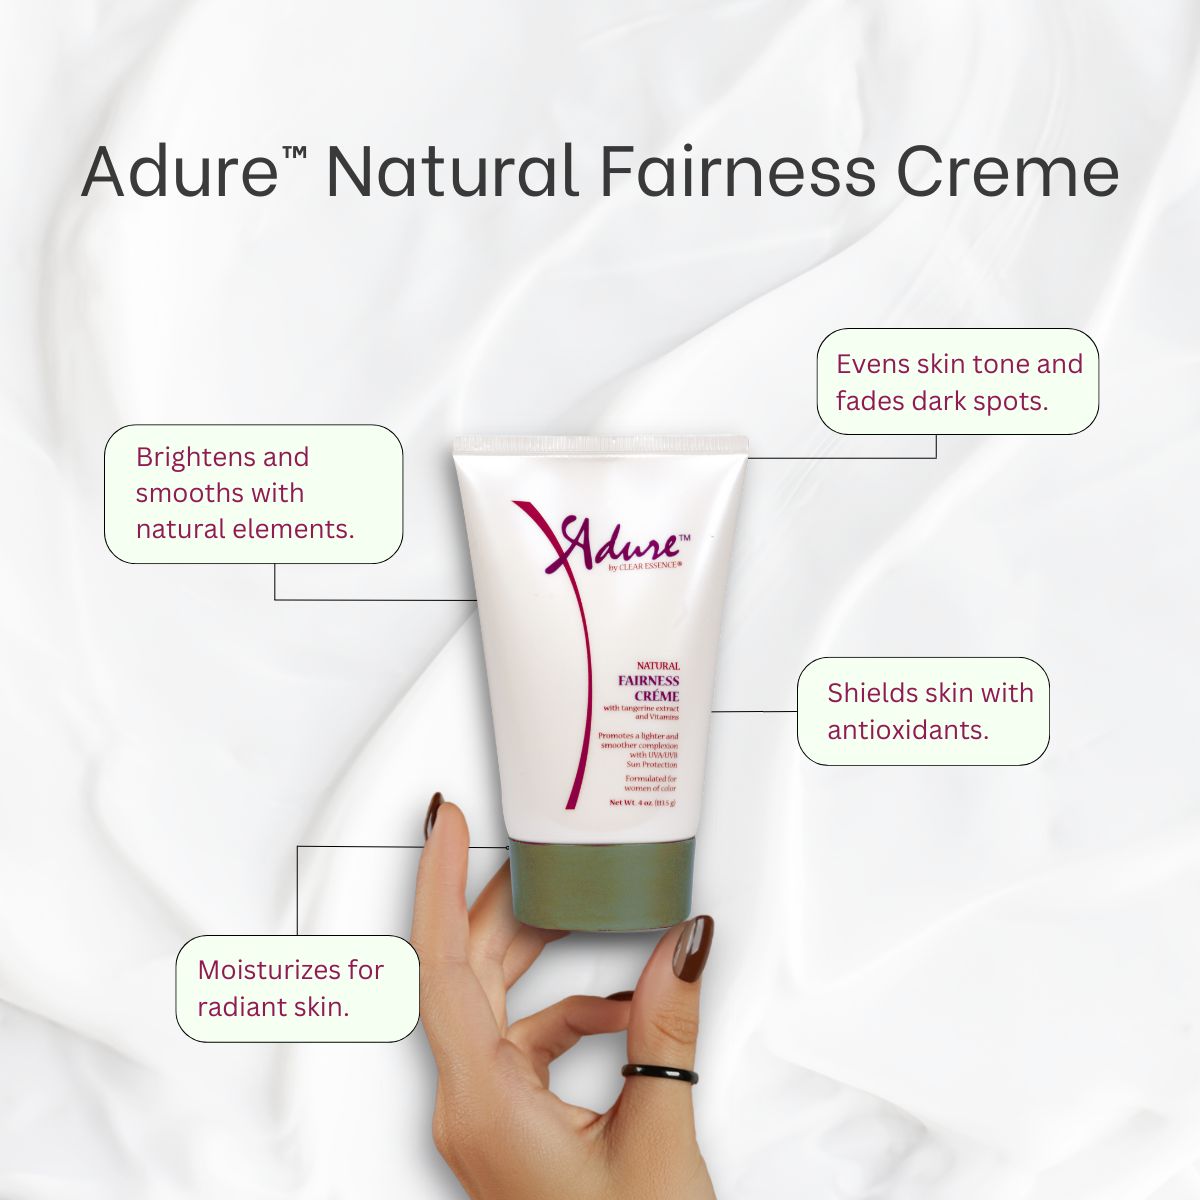 Illuminate your natural beauty with Adure™ Natural Fairness Creme 🌟. It's all about brightening and evening out your skin tone, naturally. What's your secret to a flawless glow? #BrightSkin #NaturalCare #SpotlessGlow #RadiantBeauty #SkincareSecrets